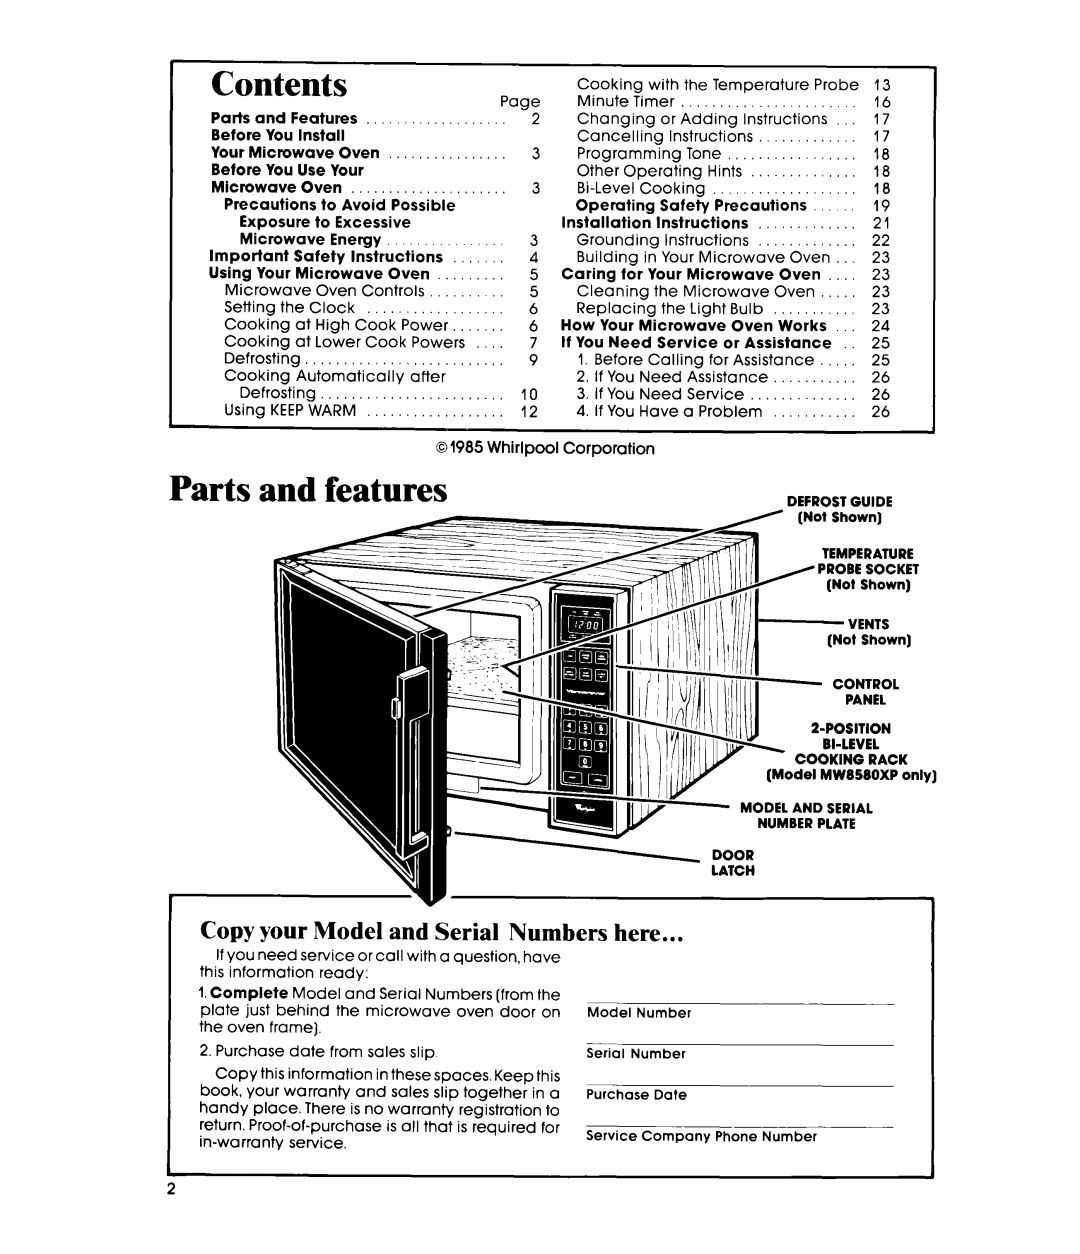 Whirlpool MW8580XP, MW856EXP manual Parts and features, Copy your Model and Serial Numbers here, Page, Contents 